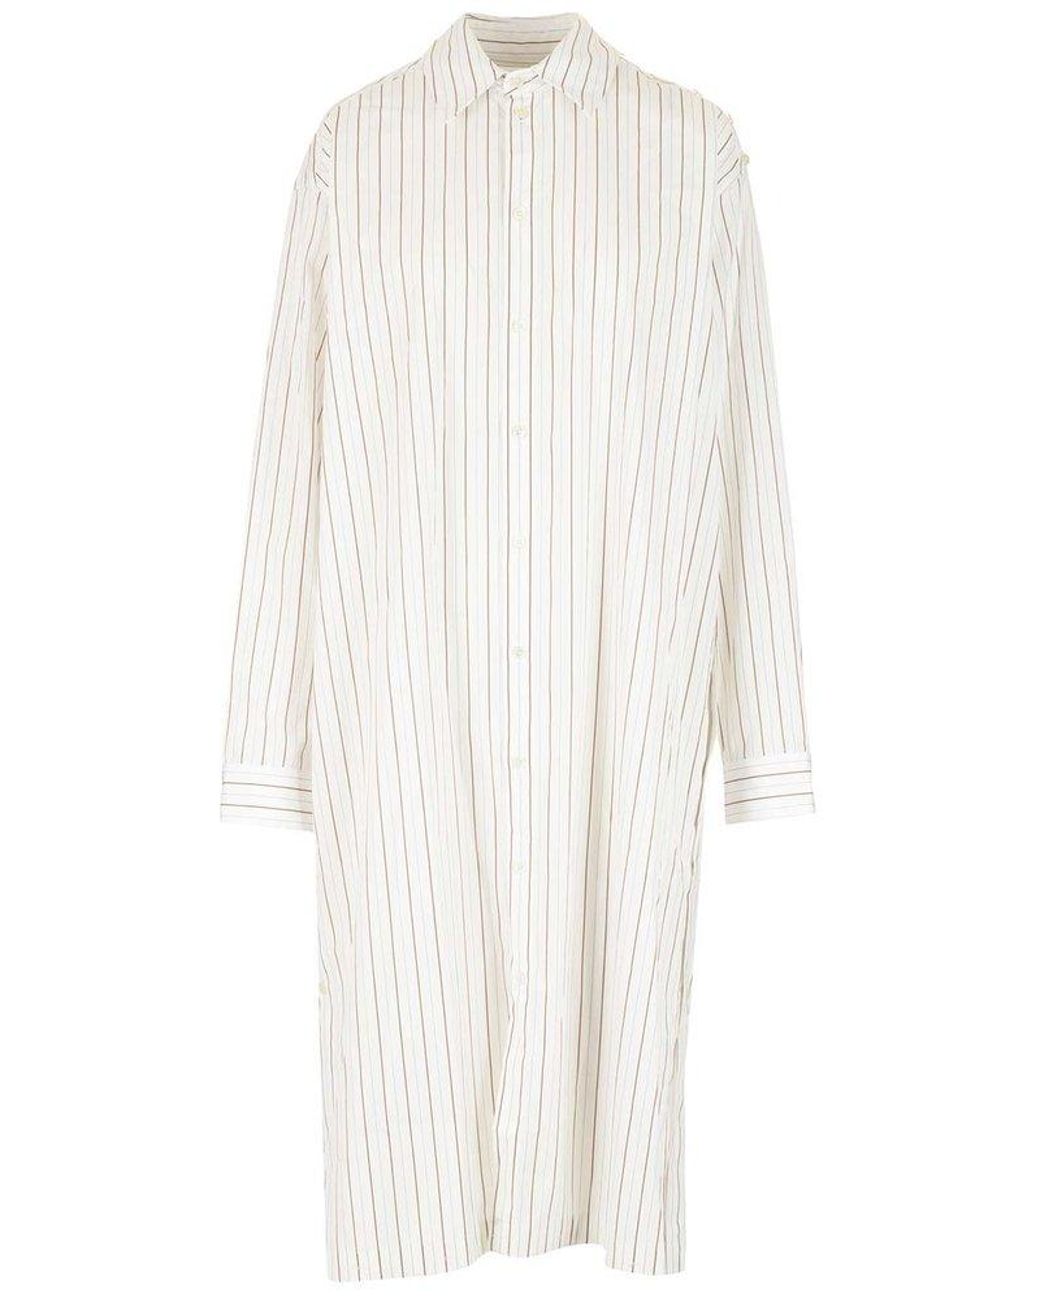 Lemaire Striped Collared Button-up Shirt Dress in White | Lyst